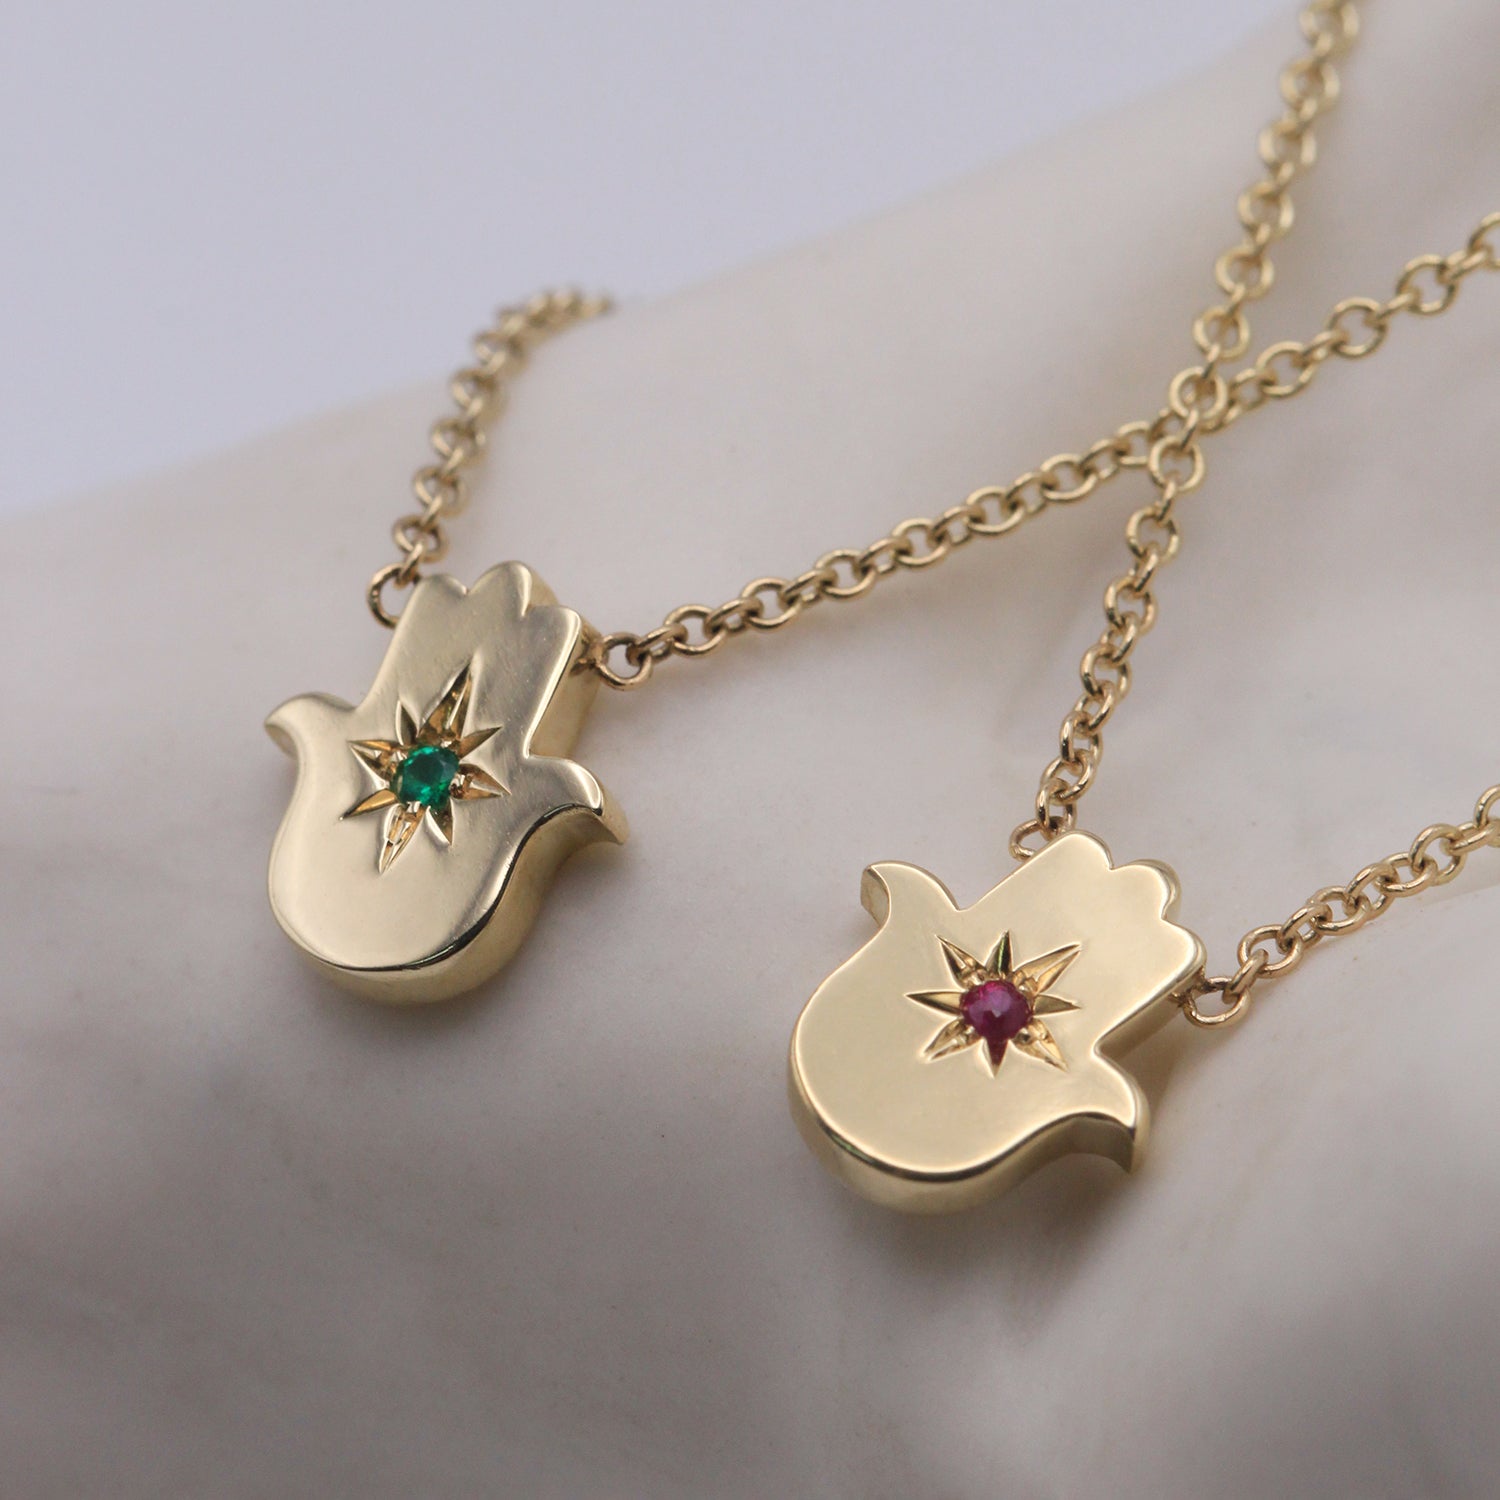 Floating Hamsa gold necklace with gem stone